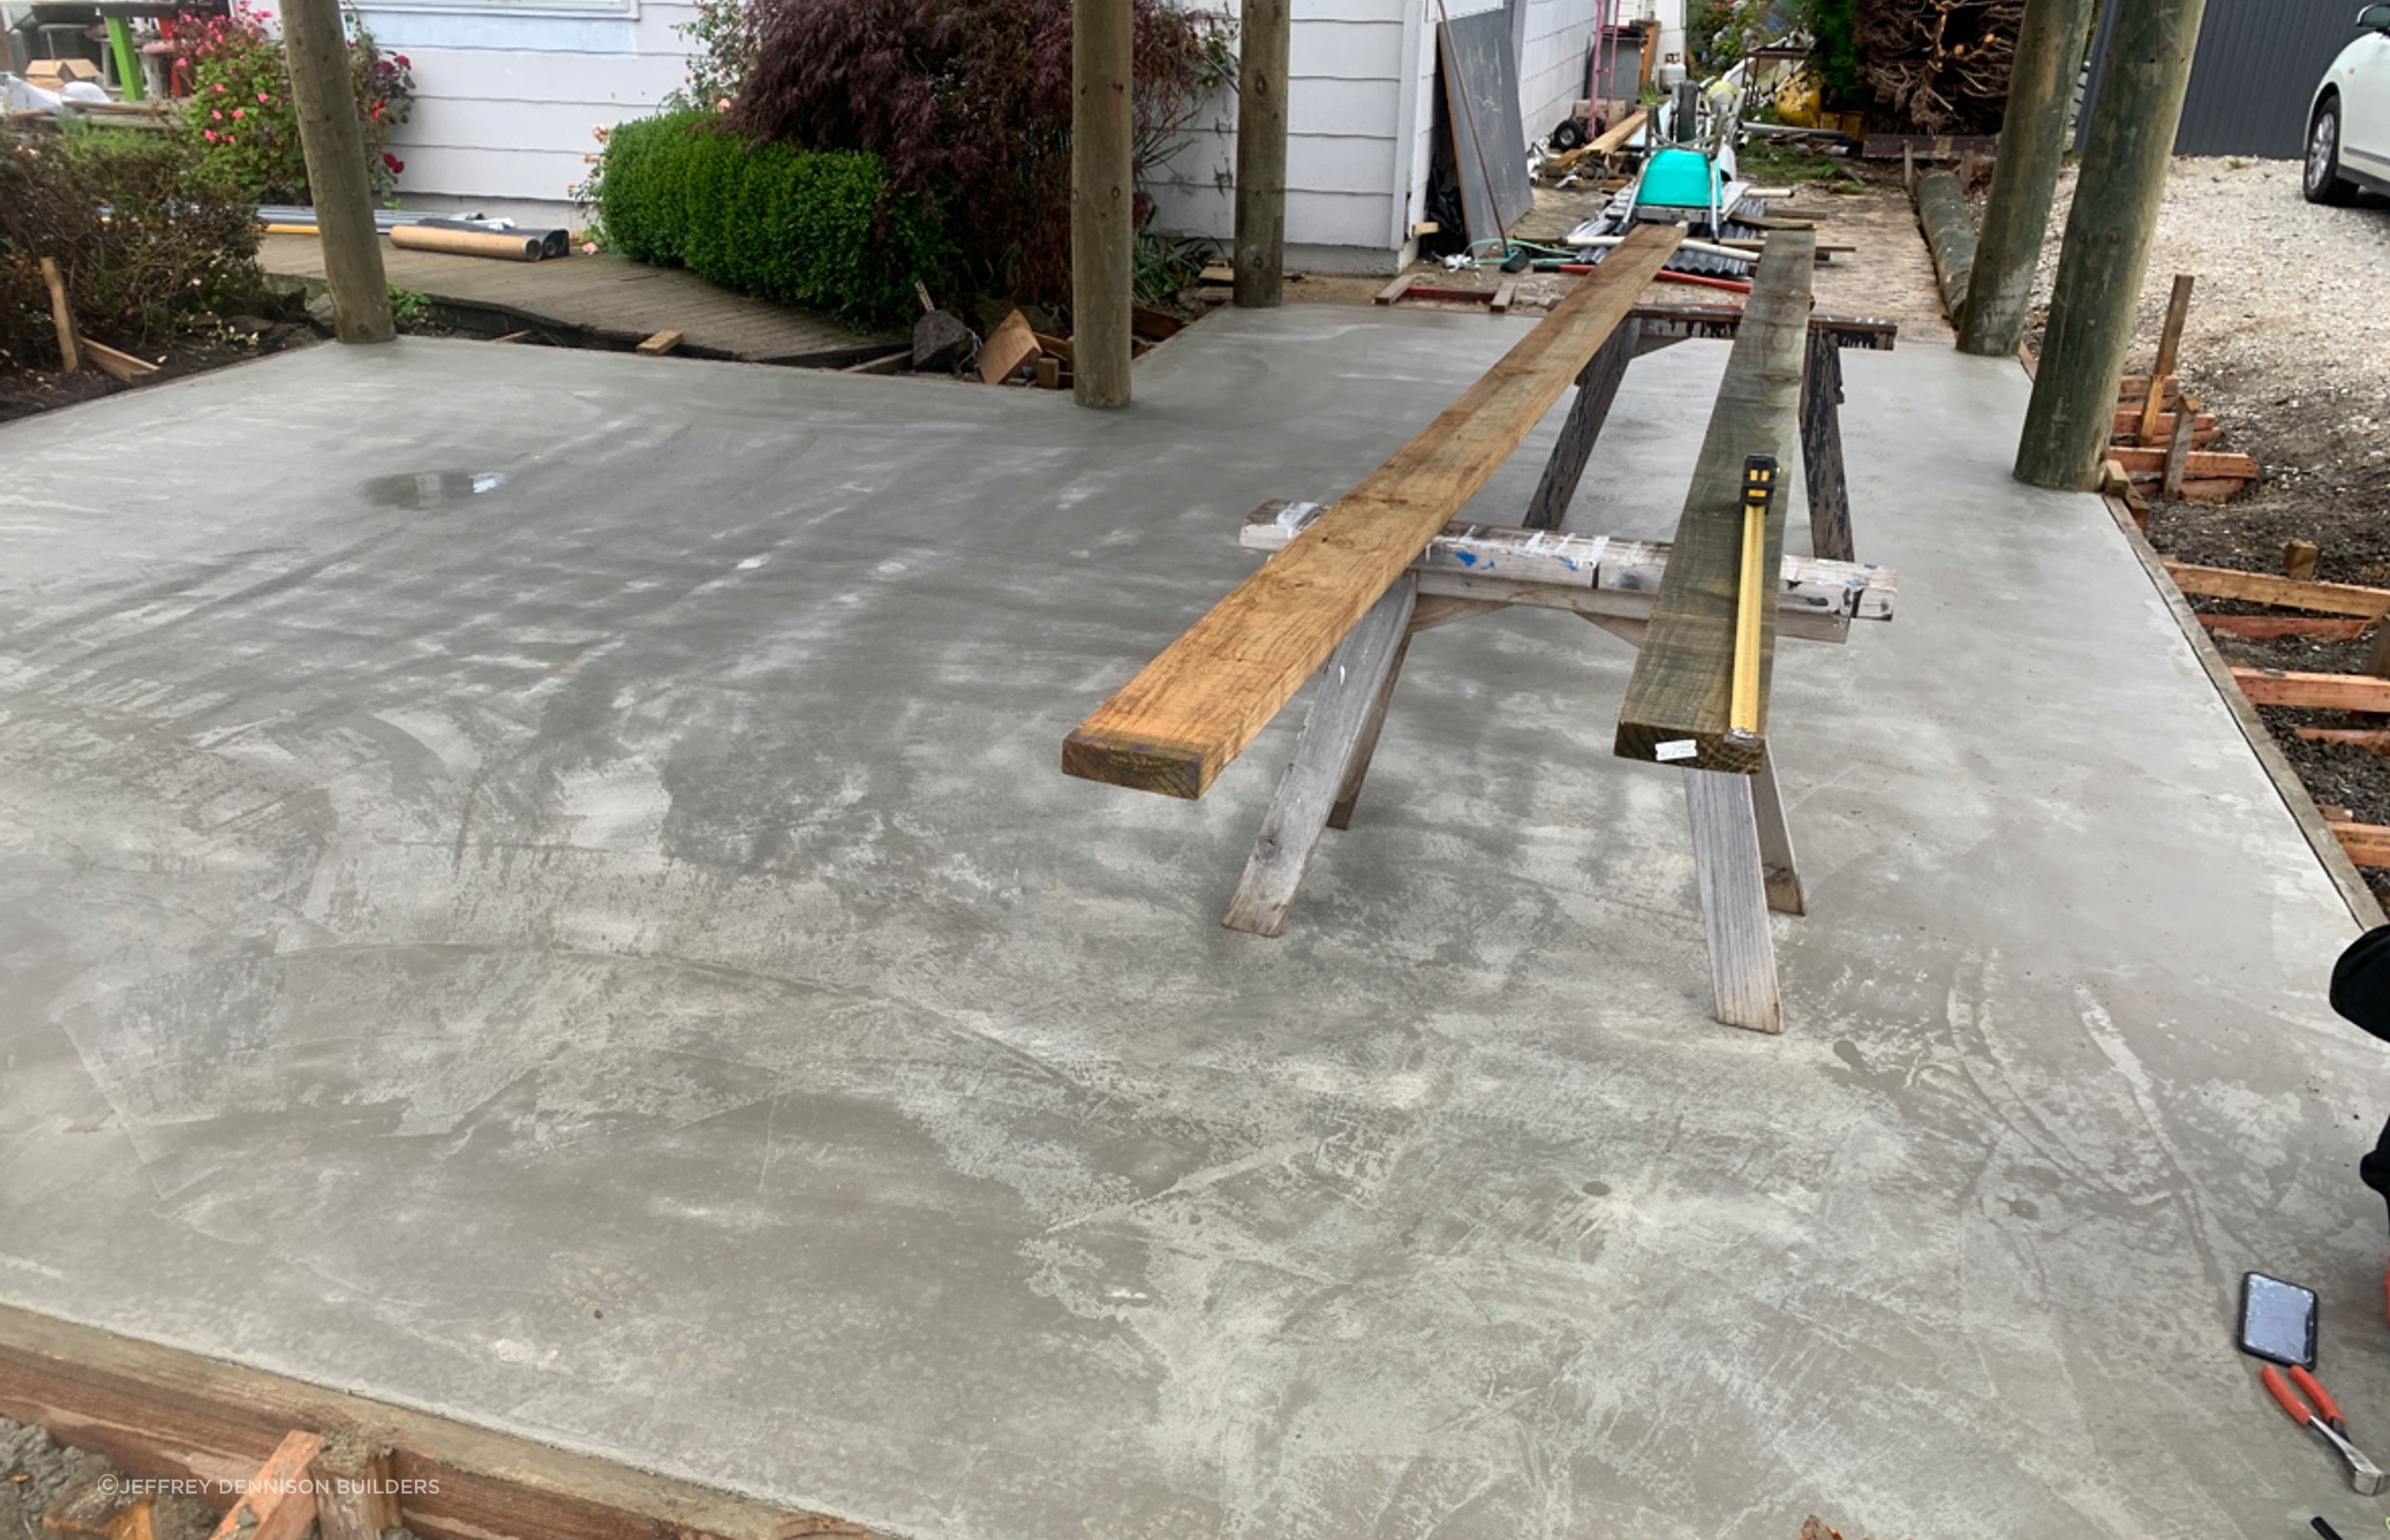 Another view of the finished concrete floor for the carport